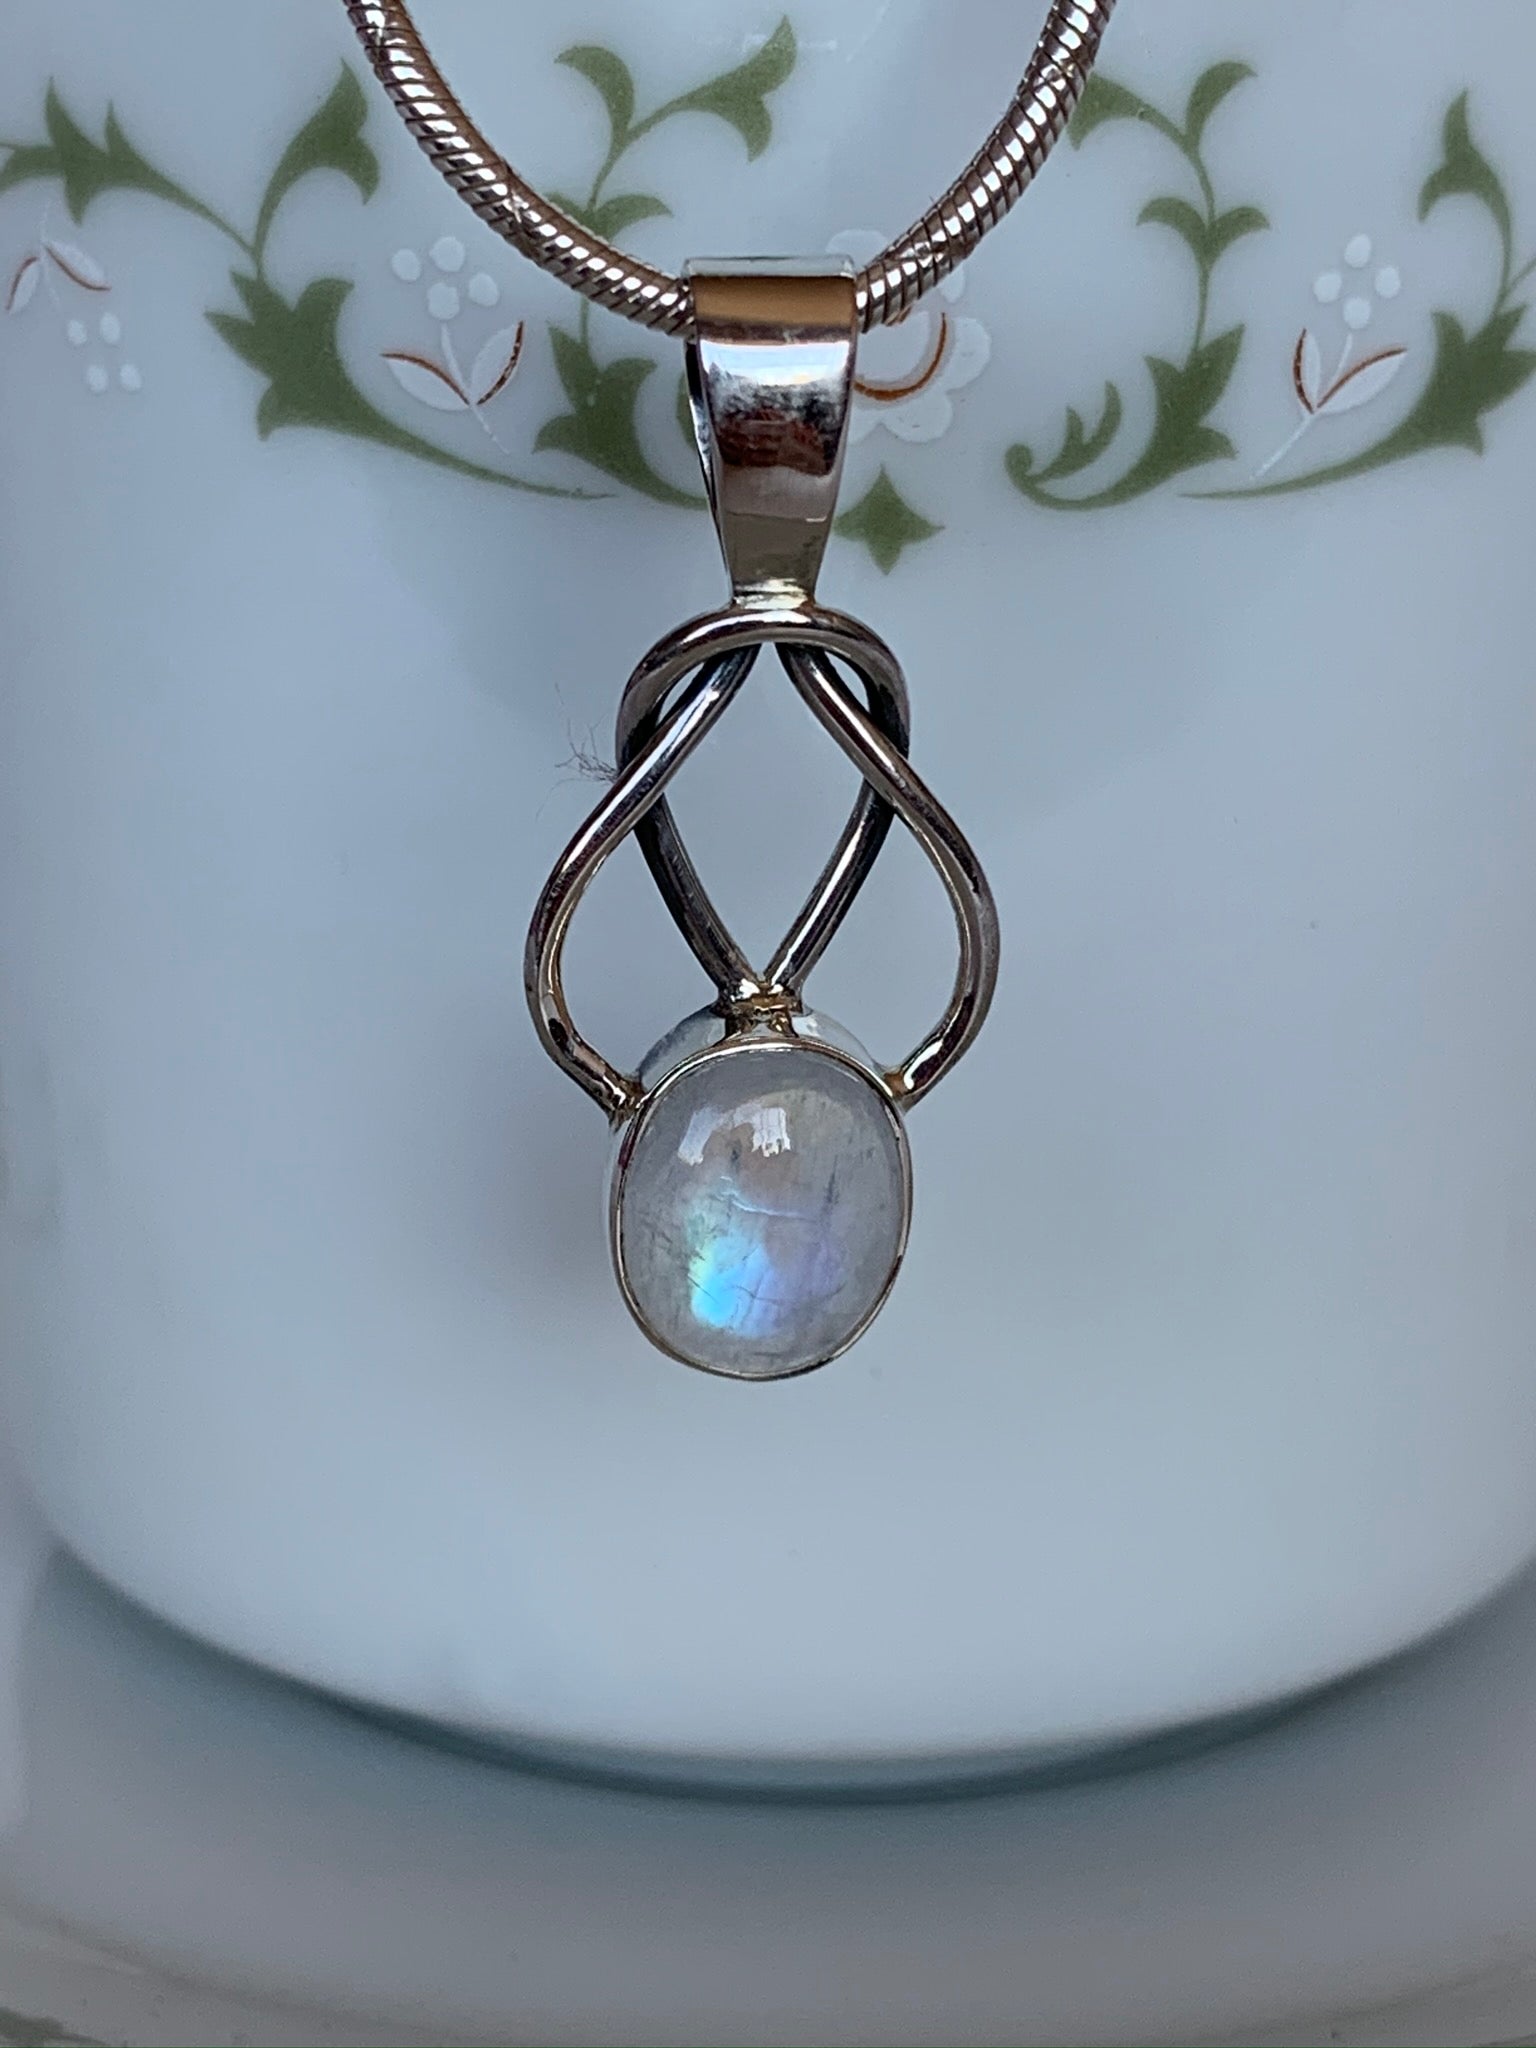 Close-up view. This is a sterling silver love knot pendant (2 strands) with a beautiful moonstone at the bottom. The necklace chain is not included. Pendant is lightweight and is approximately 1¾" long. Necklace chain not included.